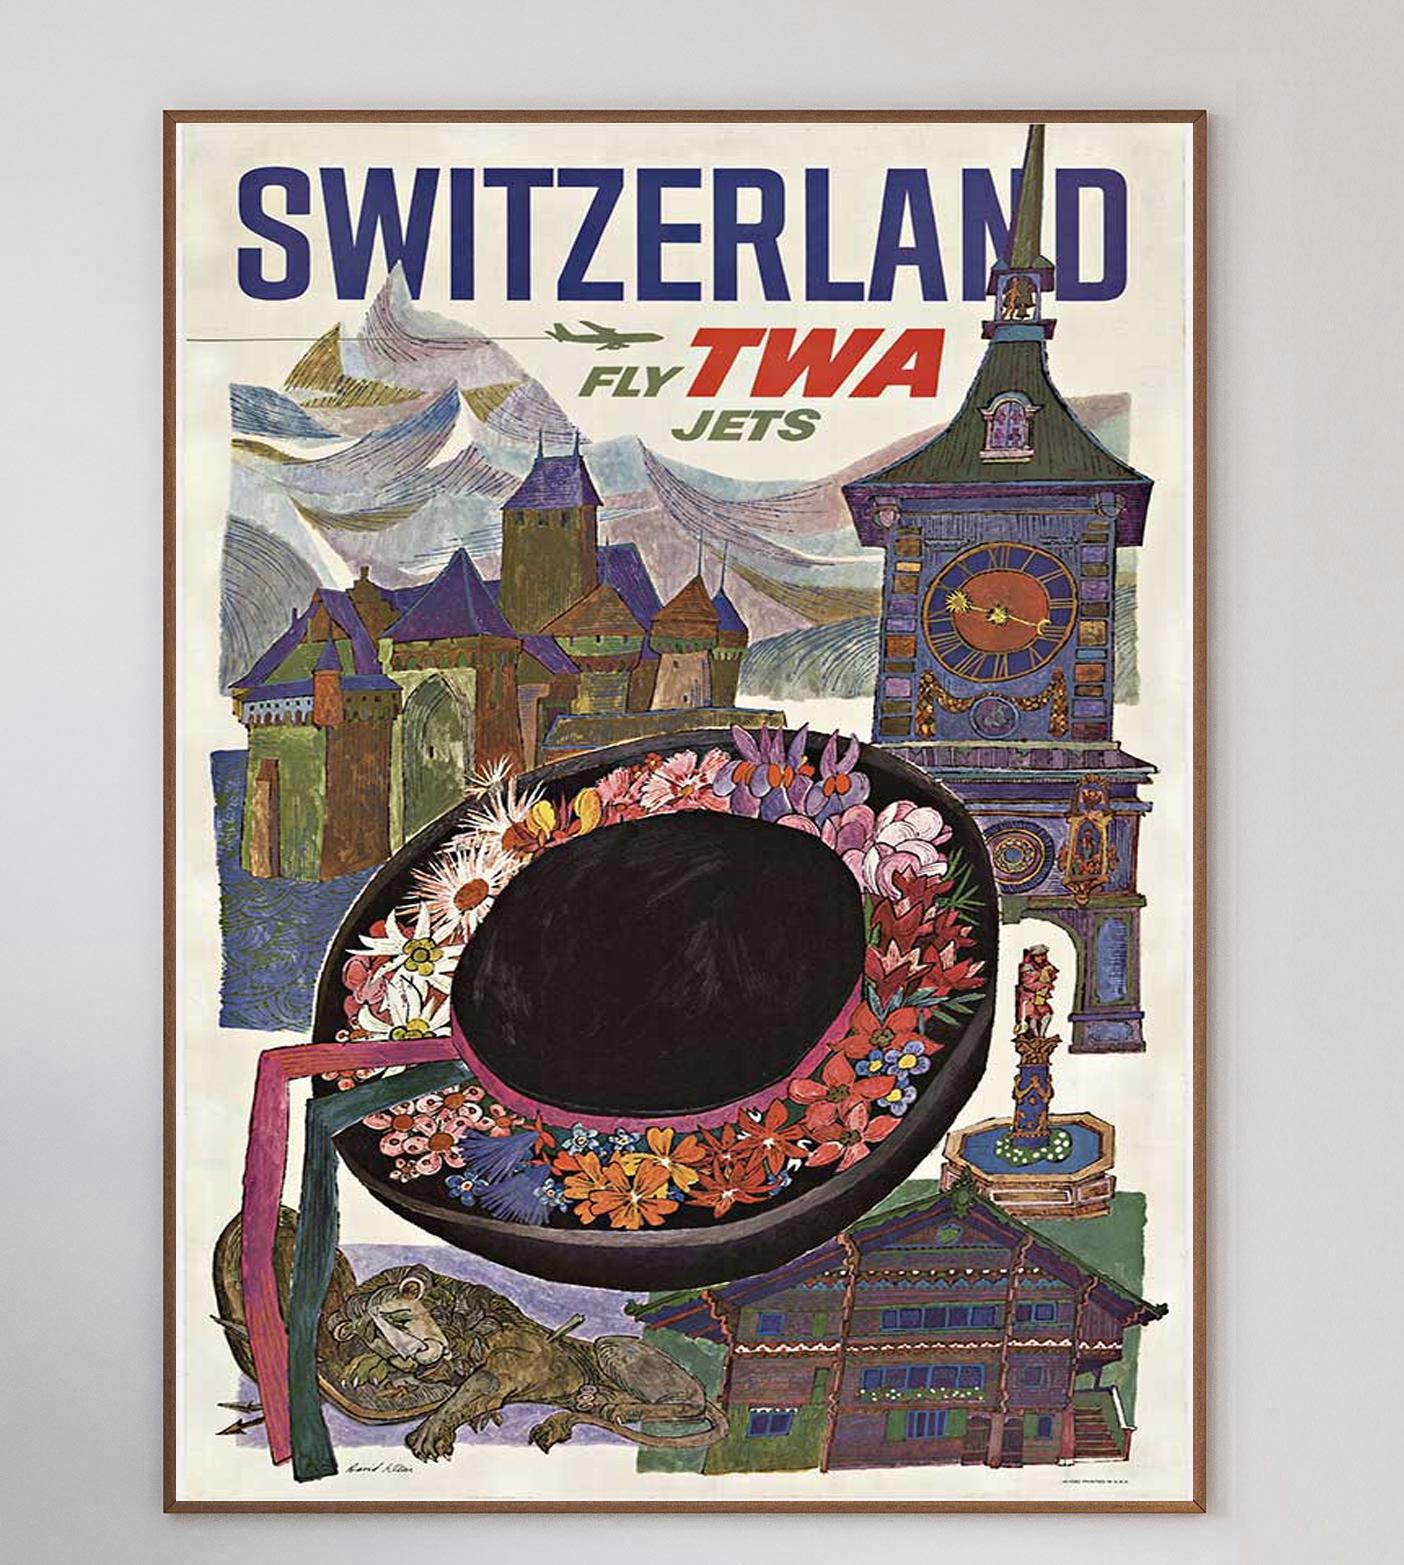 This poster was created in 1960 for Howard Hughes' Trans World Airlines promoting their routes to Switzerland from the USA. Illustrated by influential American artist David Klein, this design features landmarks that you would hope to see on a trip